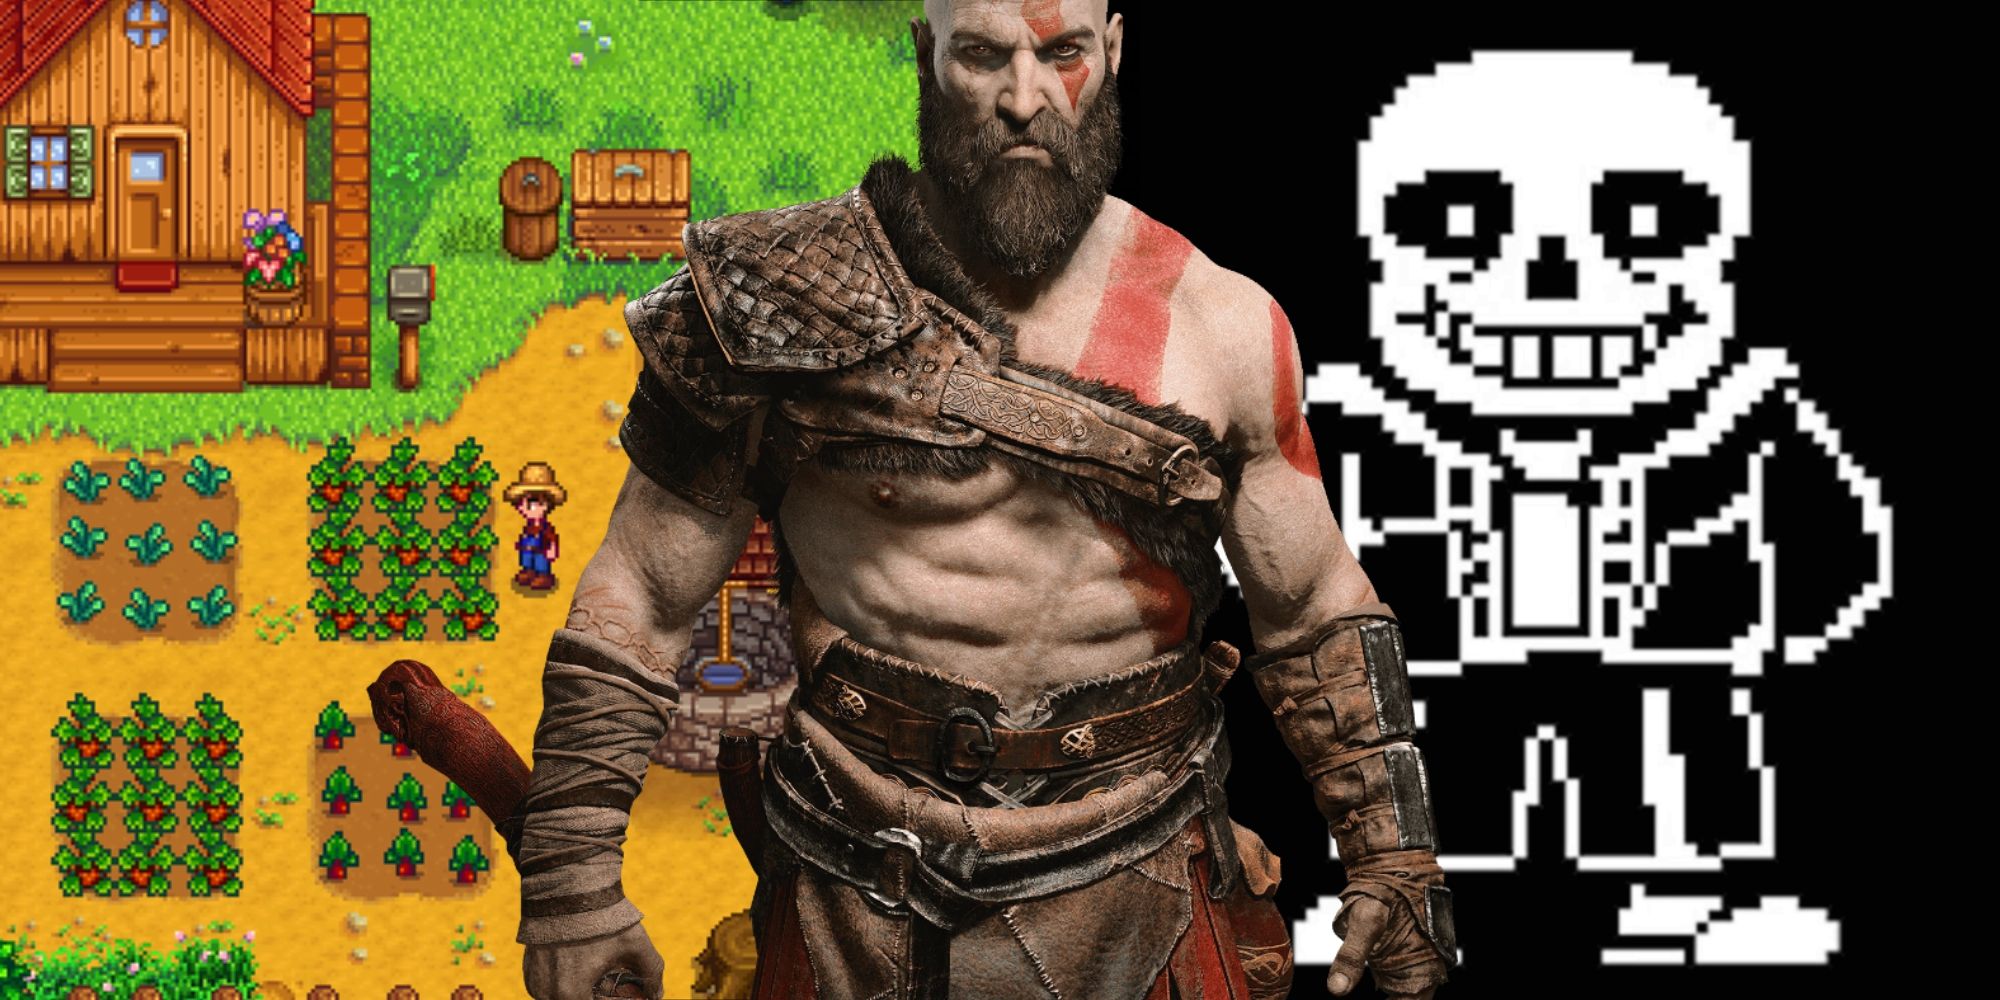 Collage of Stardew Valley, God of War's Kratos, and Undertale's Sans